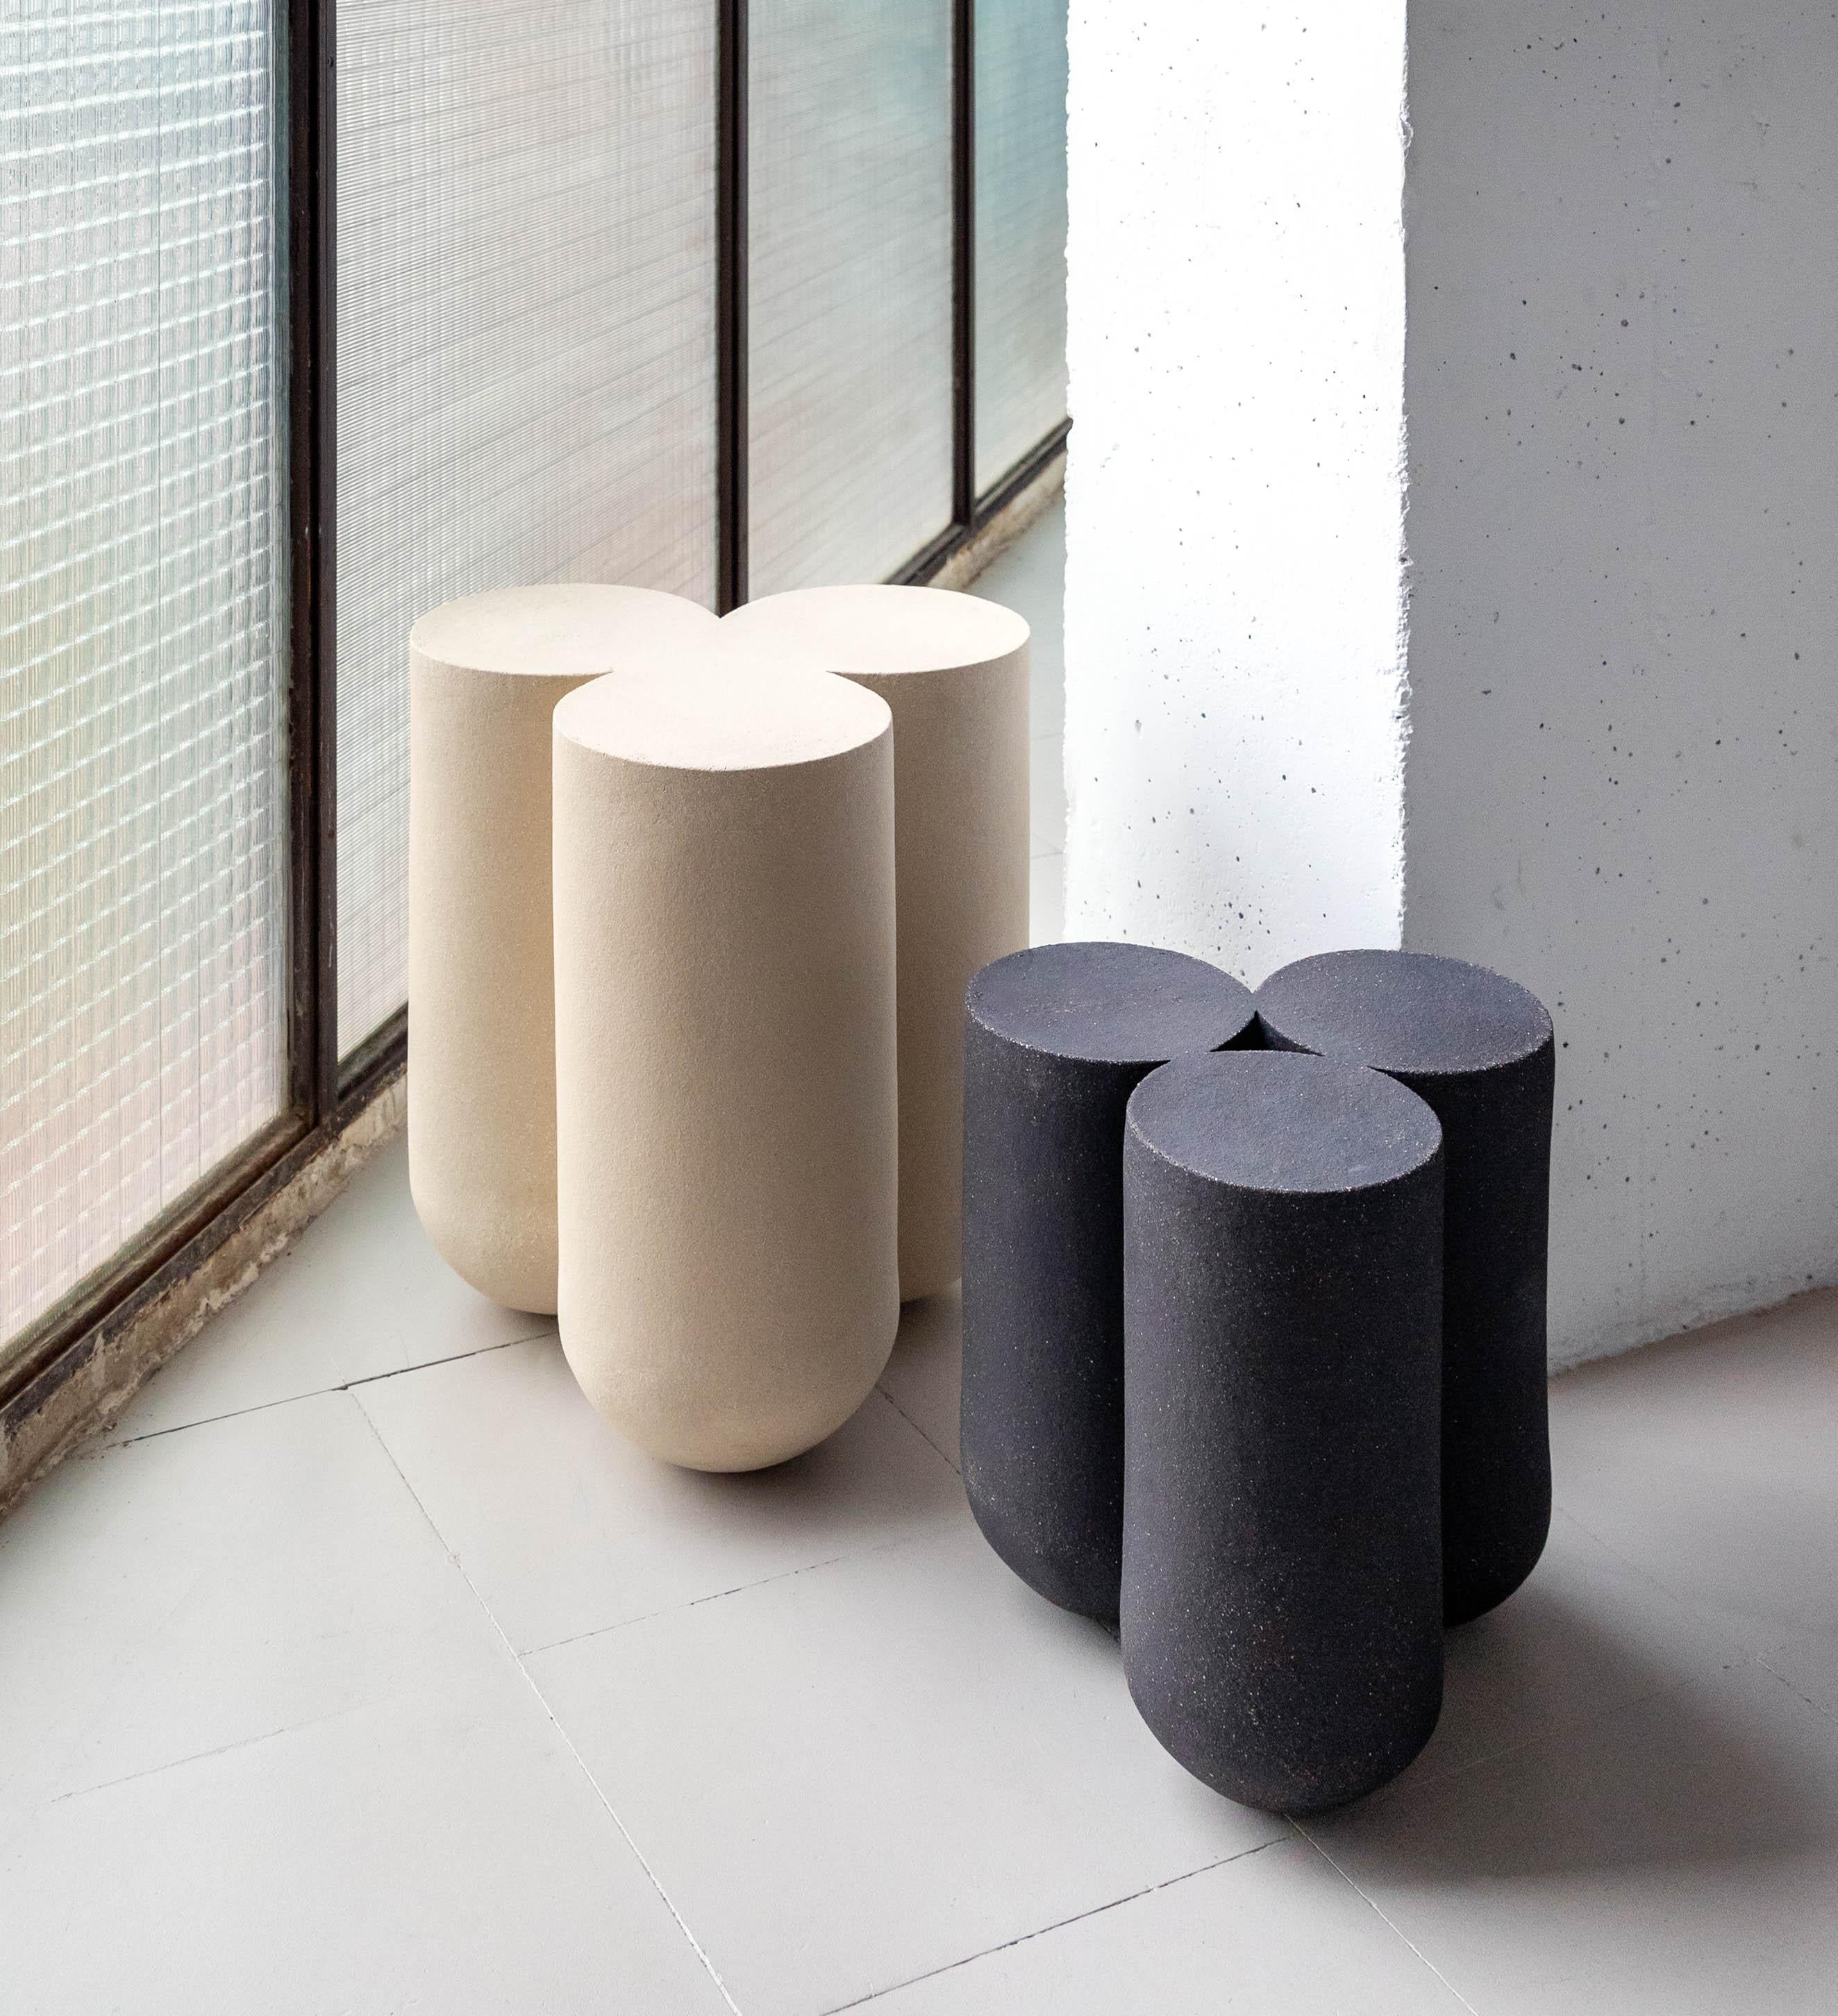 Set of 2 Clay Moor Side Tables by Lisa Allegra
Moor collection
Dimensions:  Side table Ø 42 x 47 cm , Small side table Ø 32 x 35 cm.
Materials: Clay

Born in 1986 in Paris, Lisa Allegra has earned in 2010 a degree in furniture design from the École